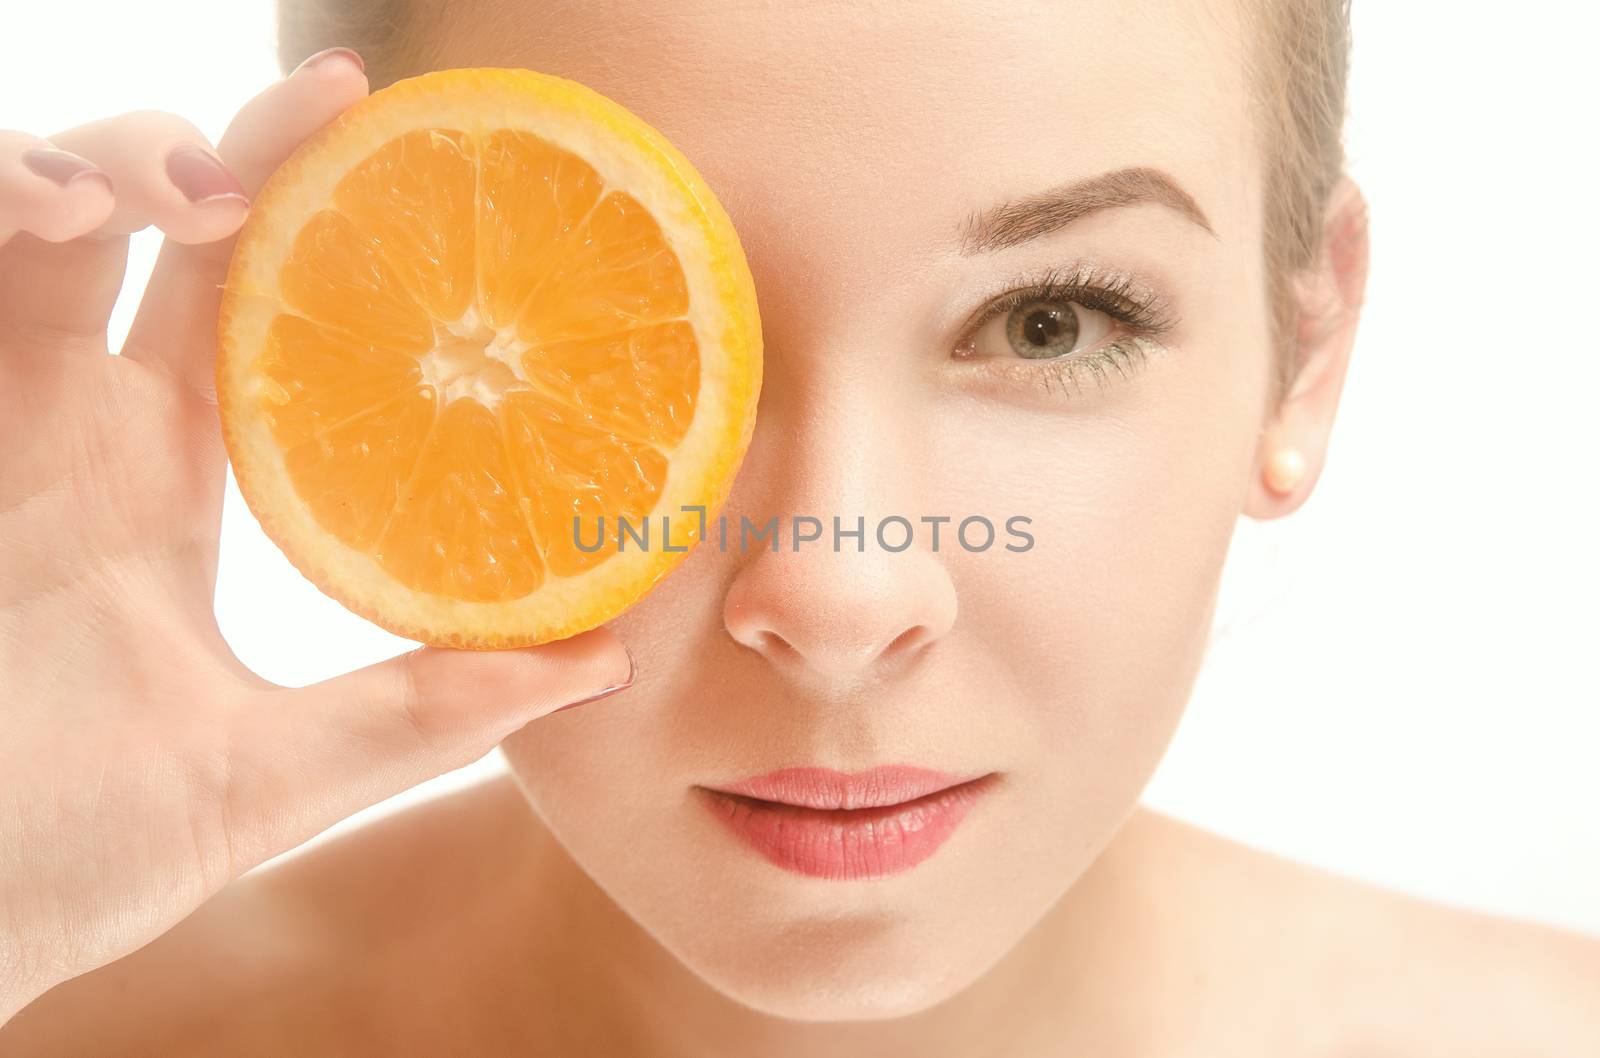 Beautiful young seminude woman of European appearance holds an orange in front of her eyes, standing on white background